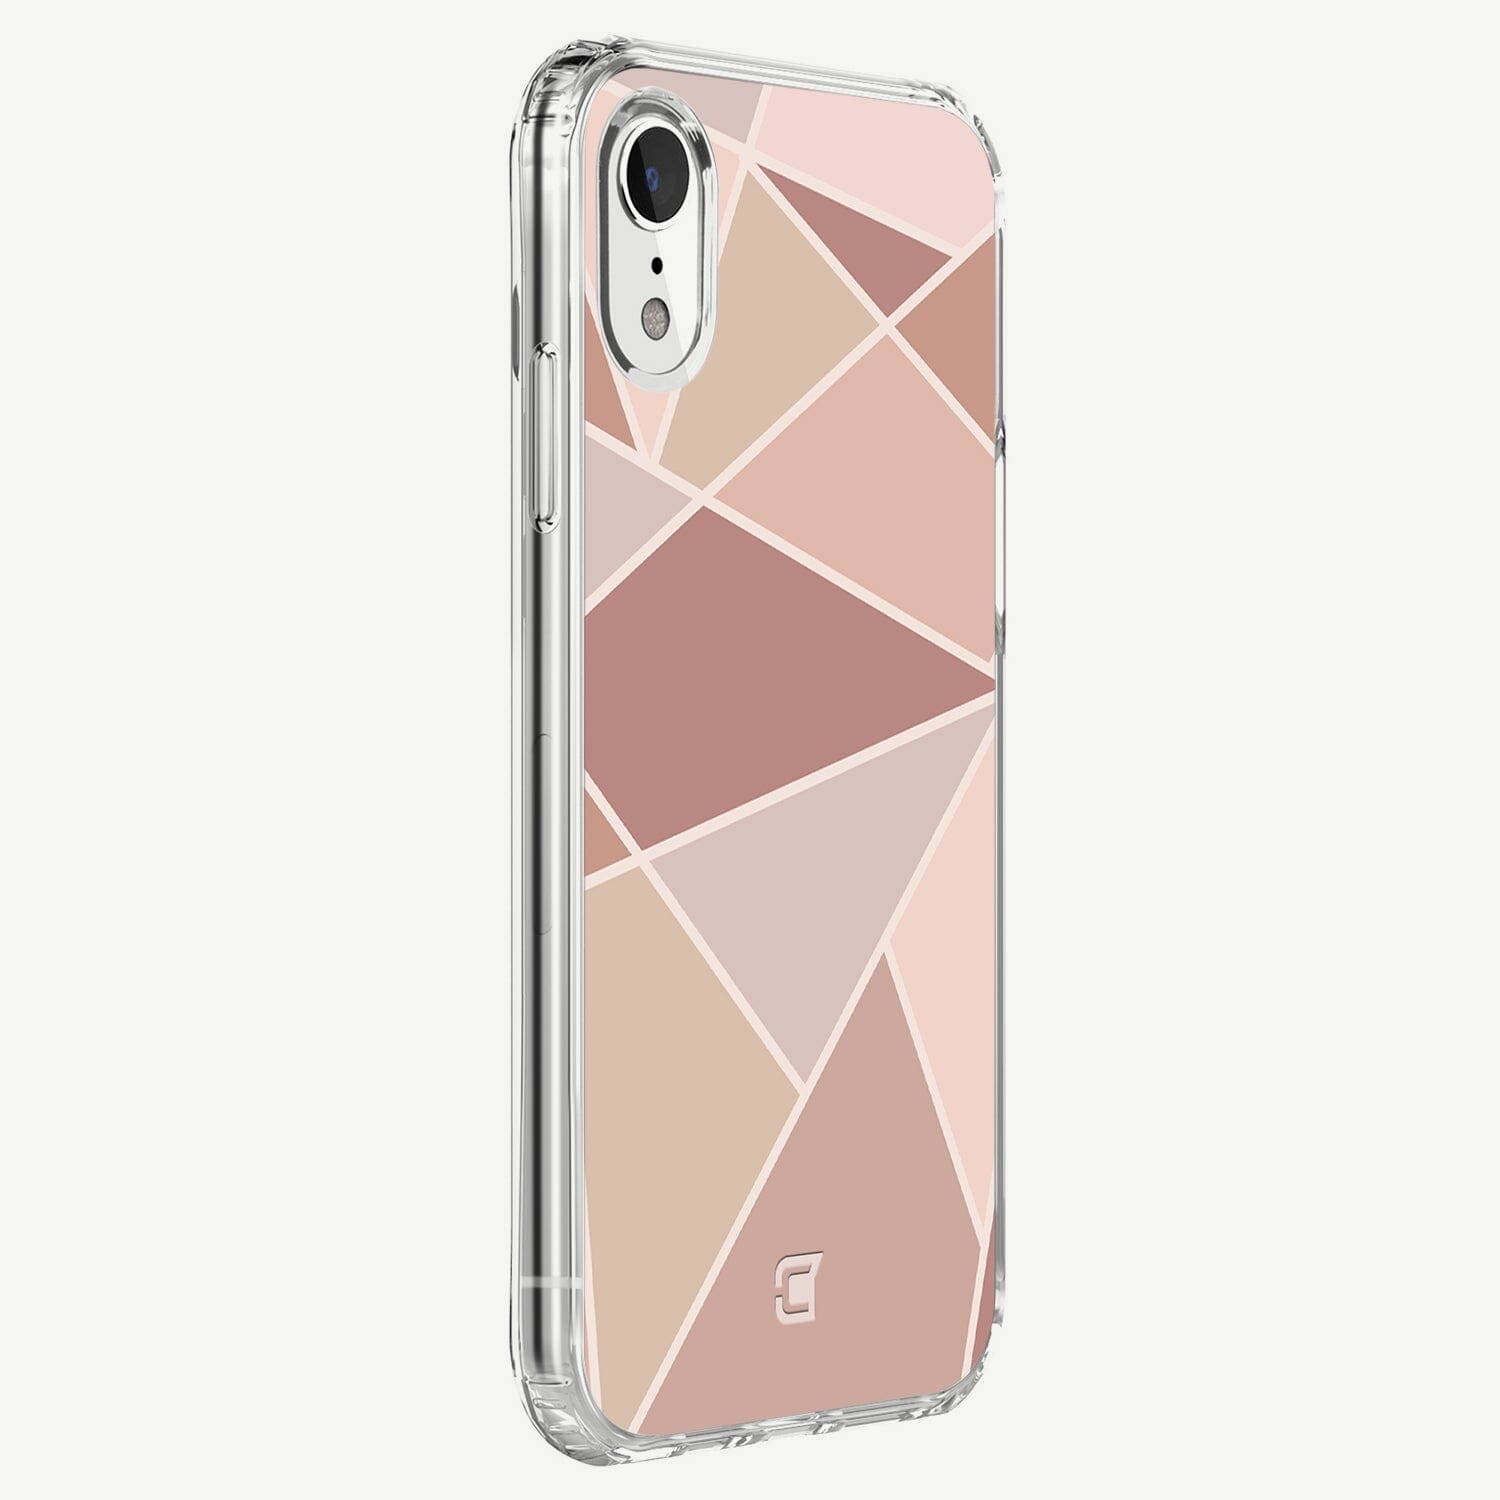 iPhone XR Case - Geometric Abstract Line Art Design